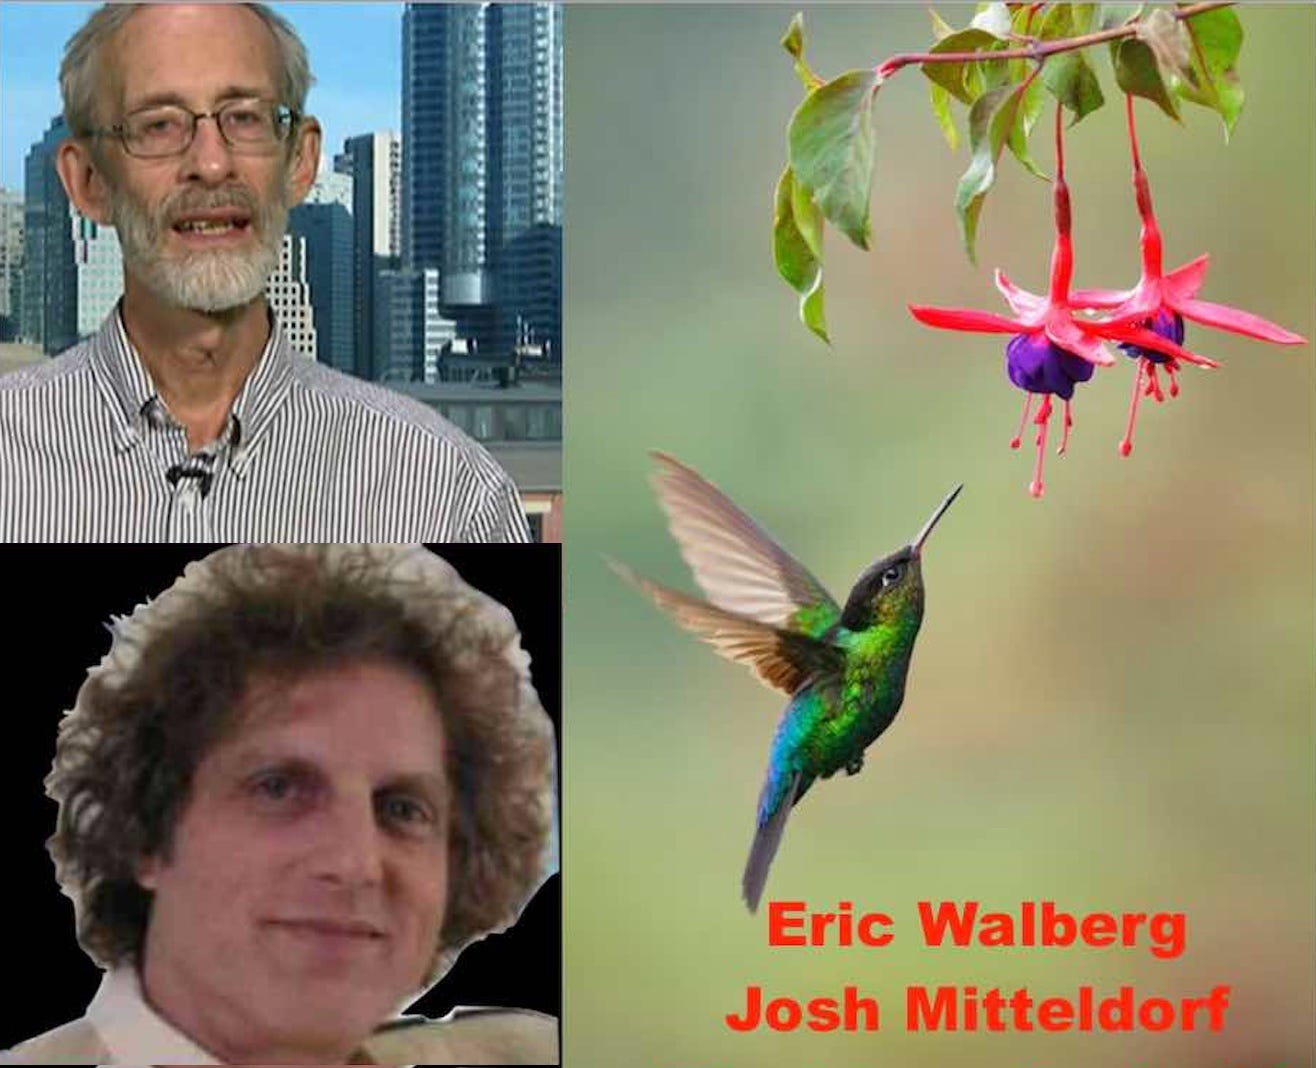 “The Evolution of Beauty” with Eric Walberg and Josh Mitteldorf